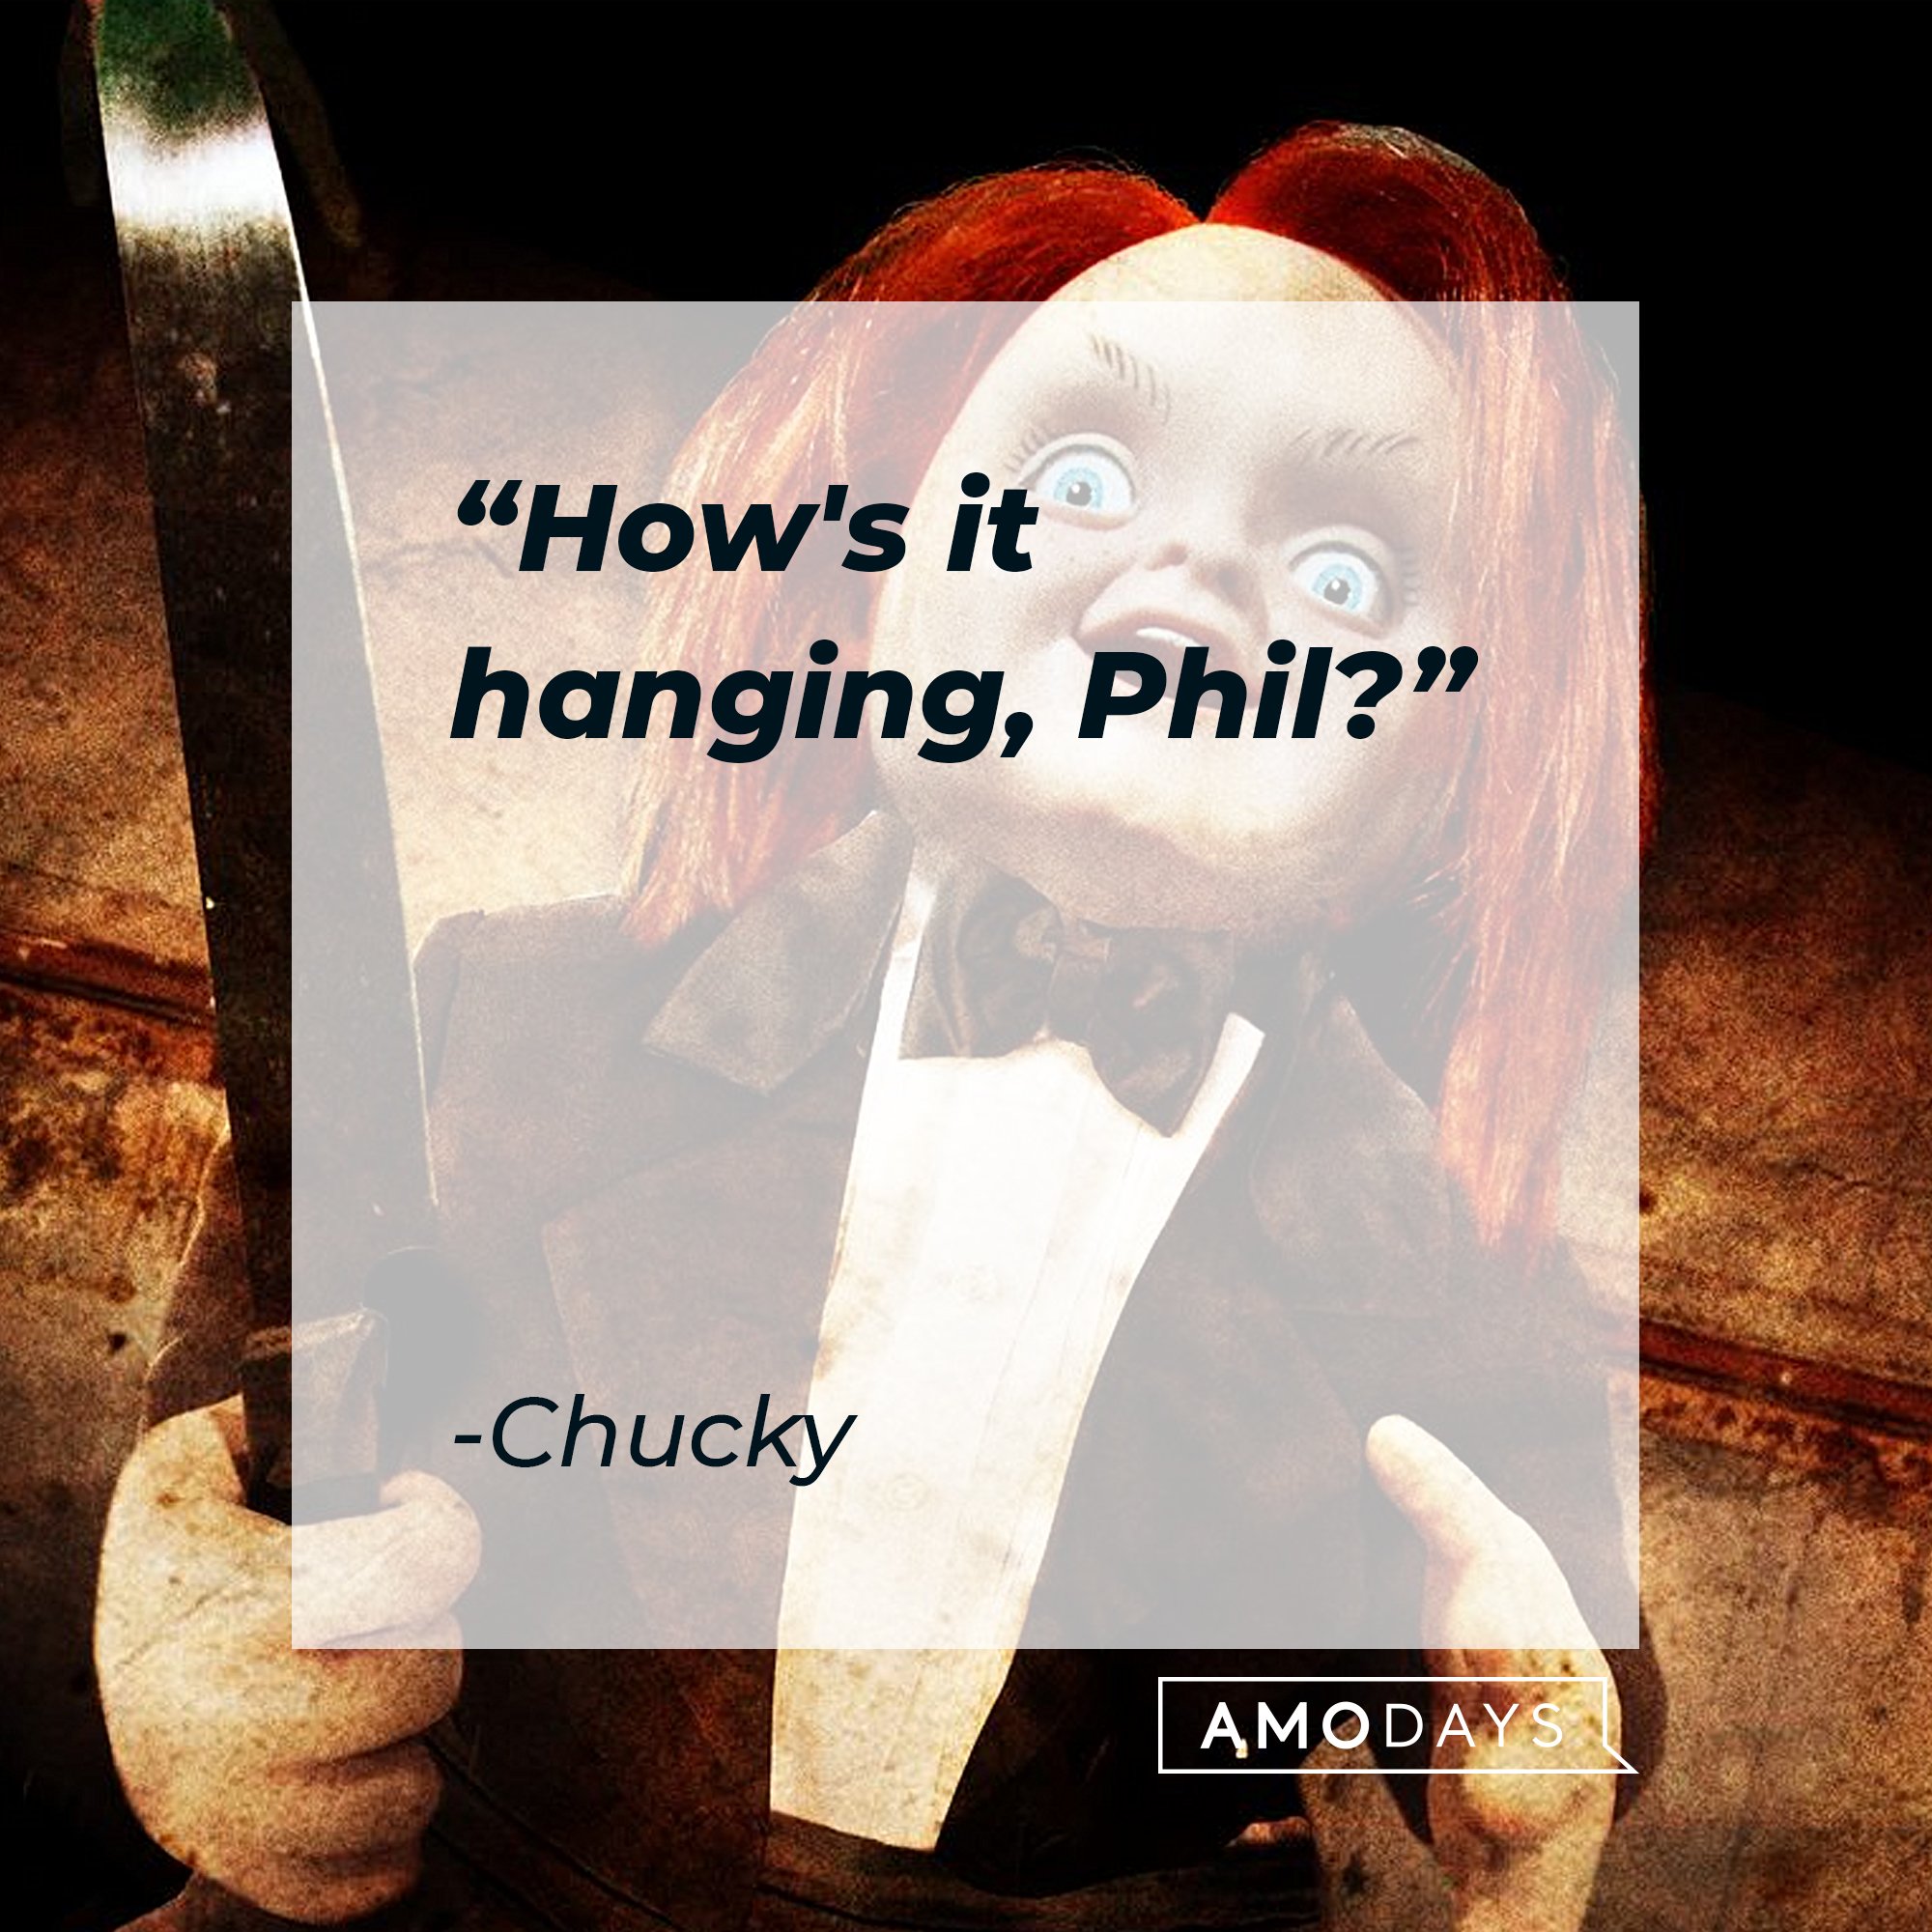 Chucky's quote: "How's it hanging, Phil?" | Image: AmoDays